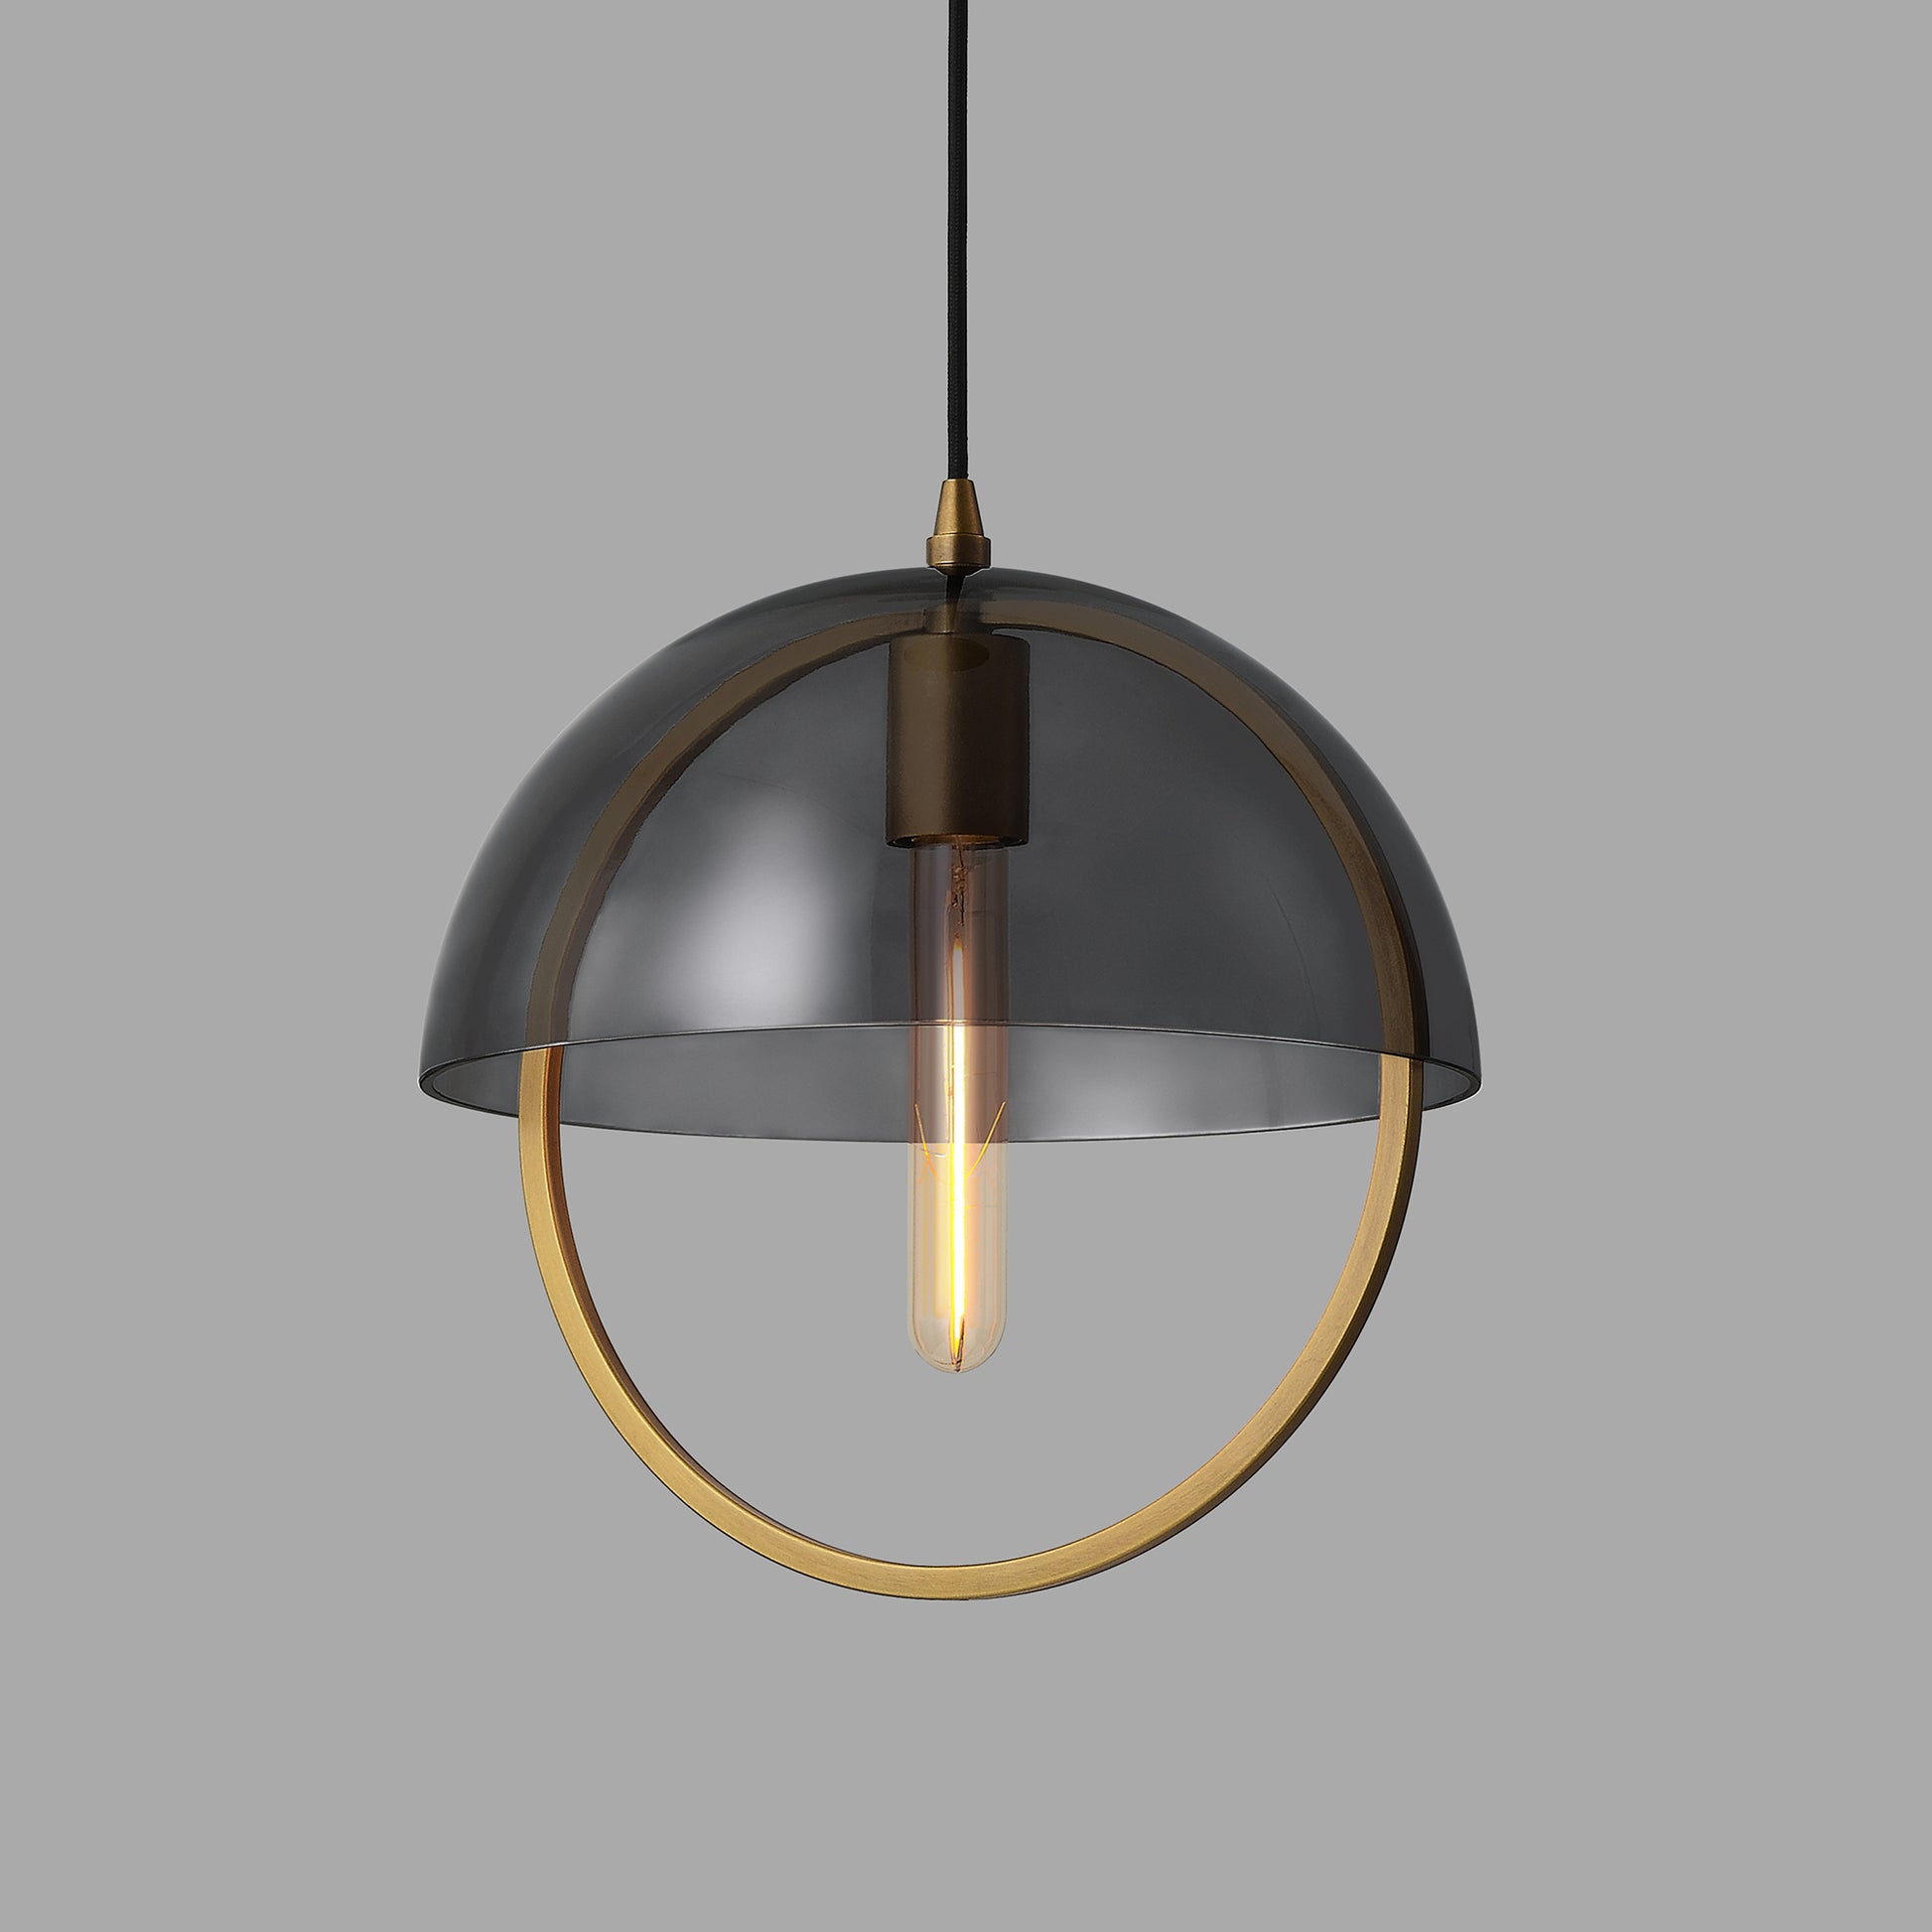 Copernica Large Pendant features the T9 Emberline LED Light Bulb. The tube LED bulb is at the center of the universe in this unique mid century modern light fixture.